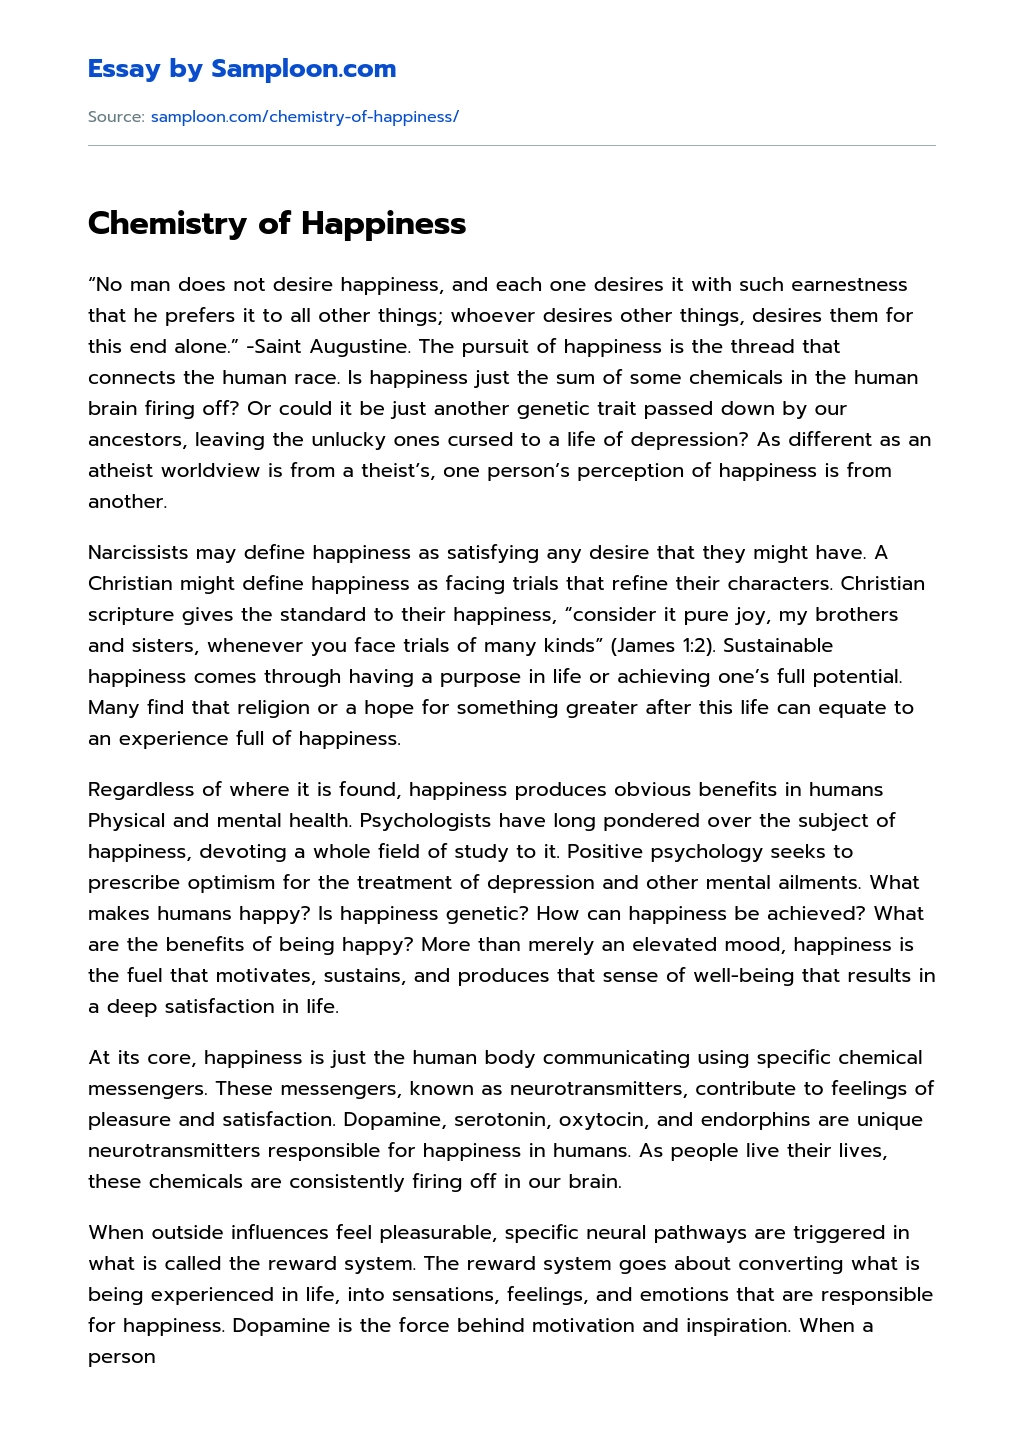 Chemistry of Happiness essay